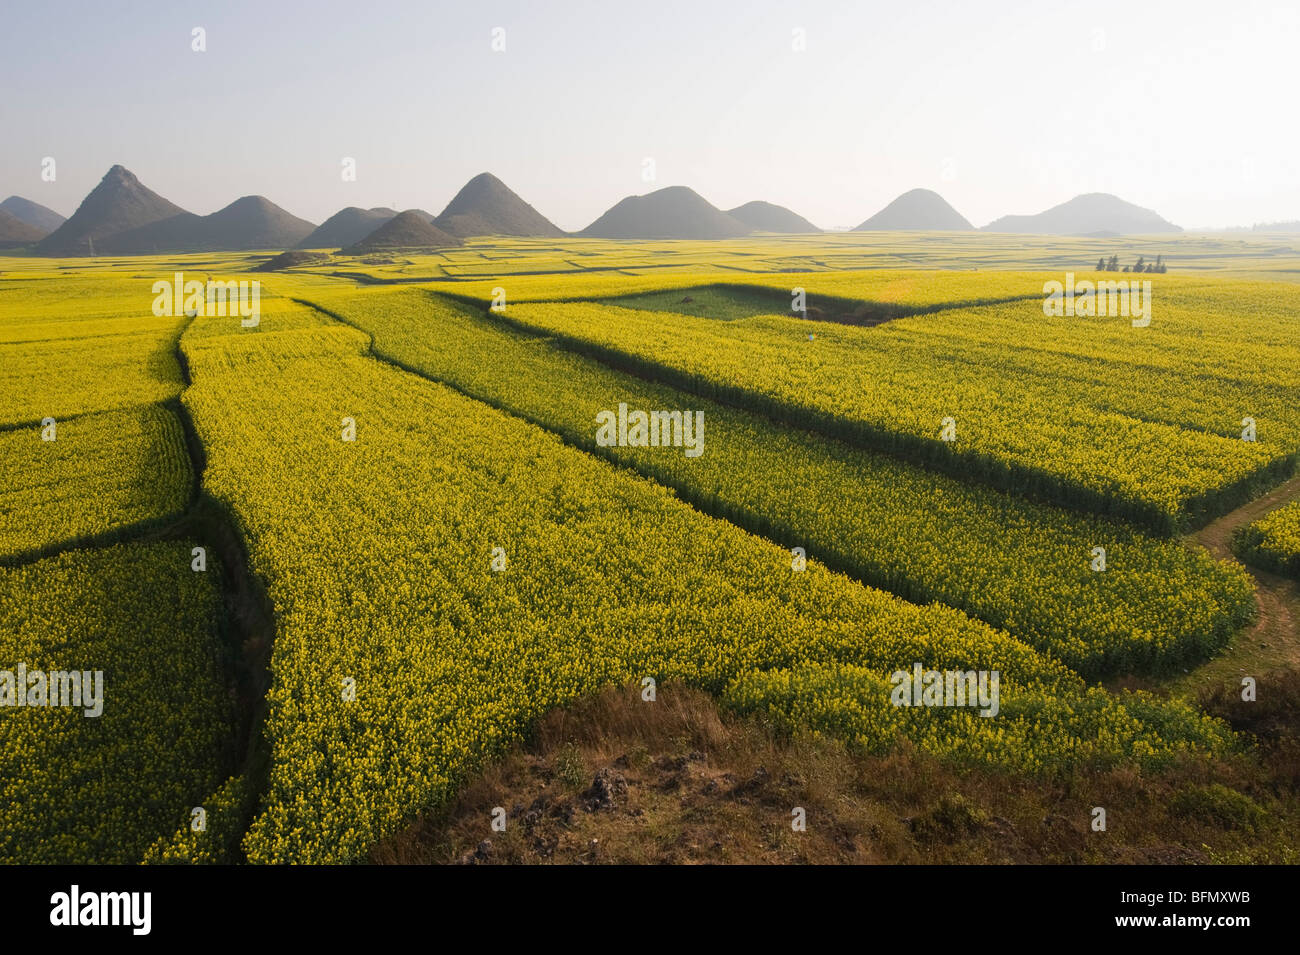 China, Yunnan province, Luoping, rapeseed flowers in bloom Stock Photo